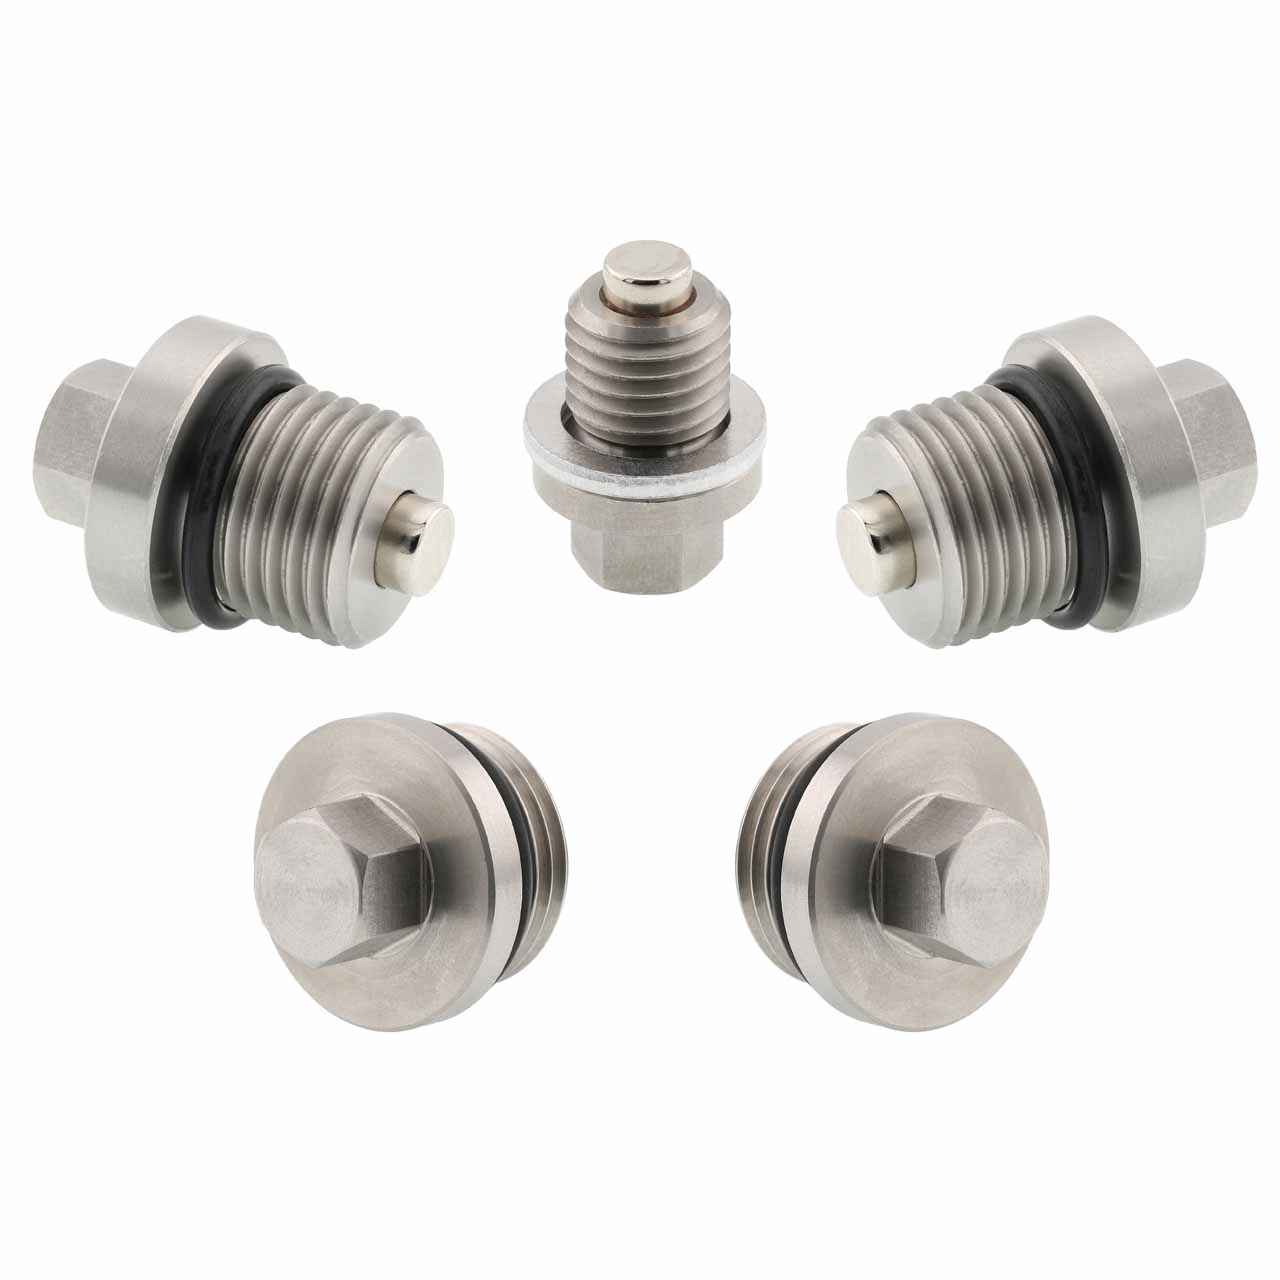 Polaris General 4 1000 Deluxe Magnetic Oil Drain Plug Kit - 2020-2022 - Engine, Transmission, Differential - Made In USA